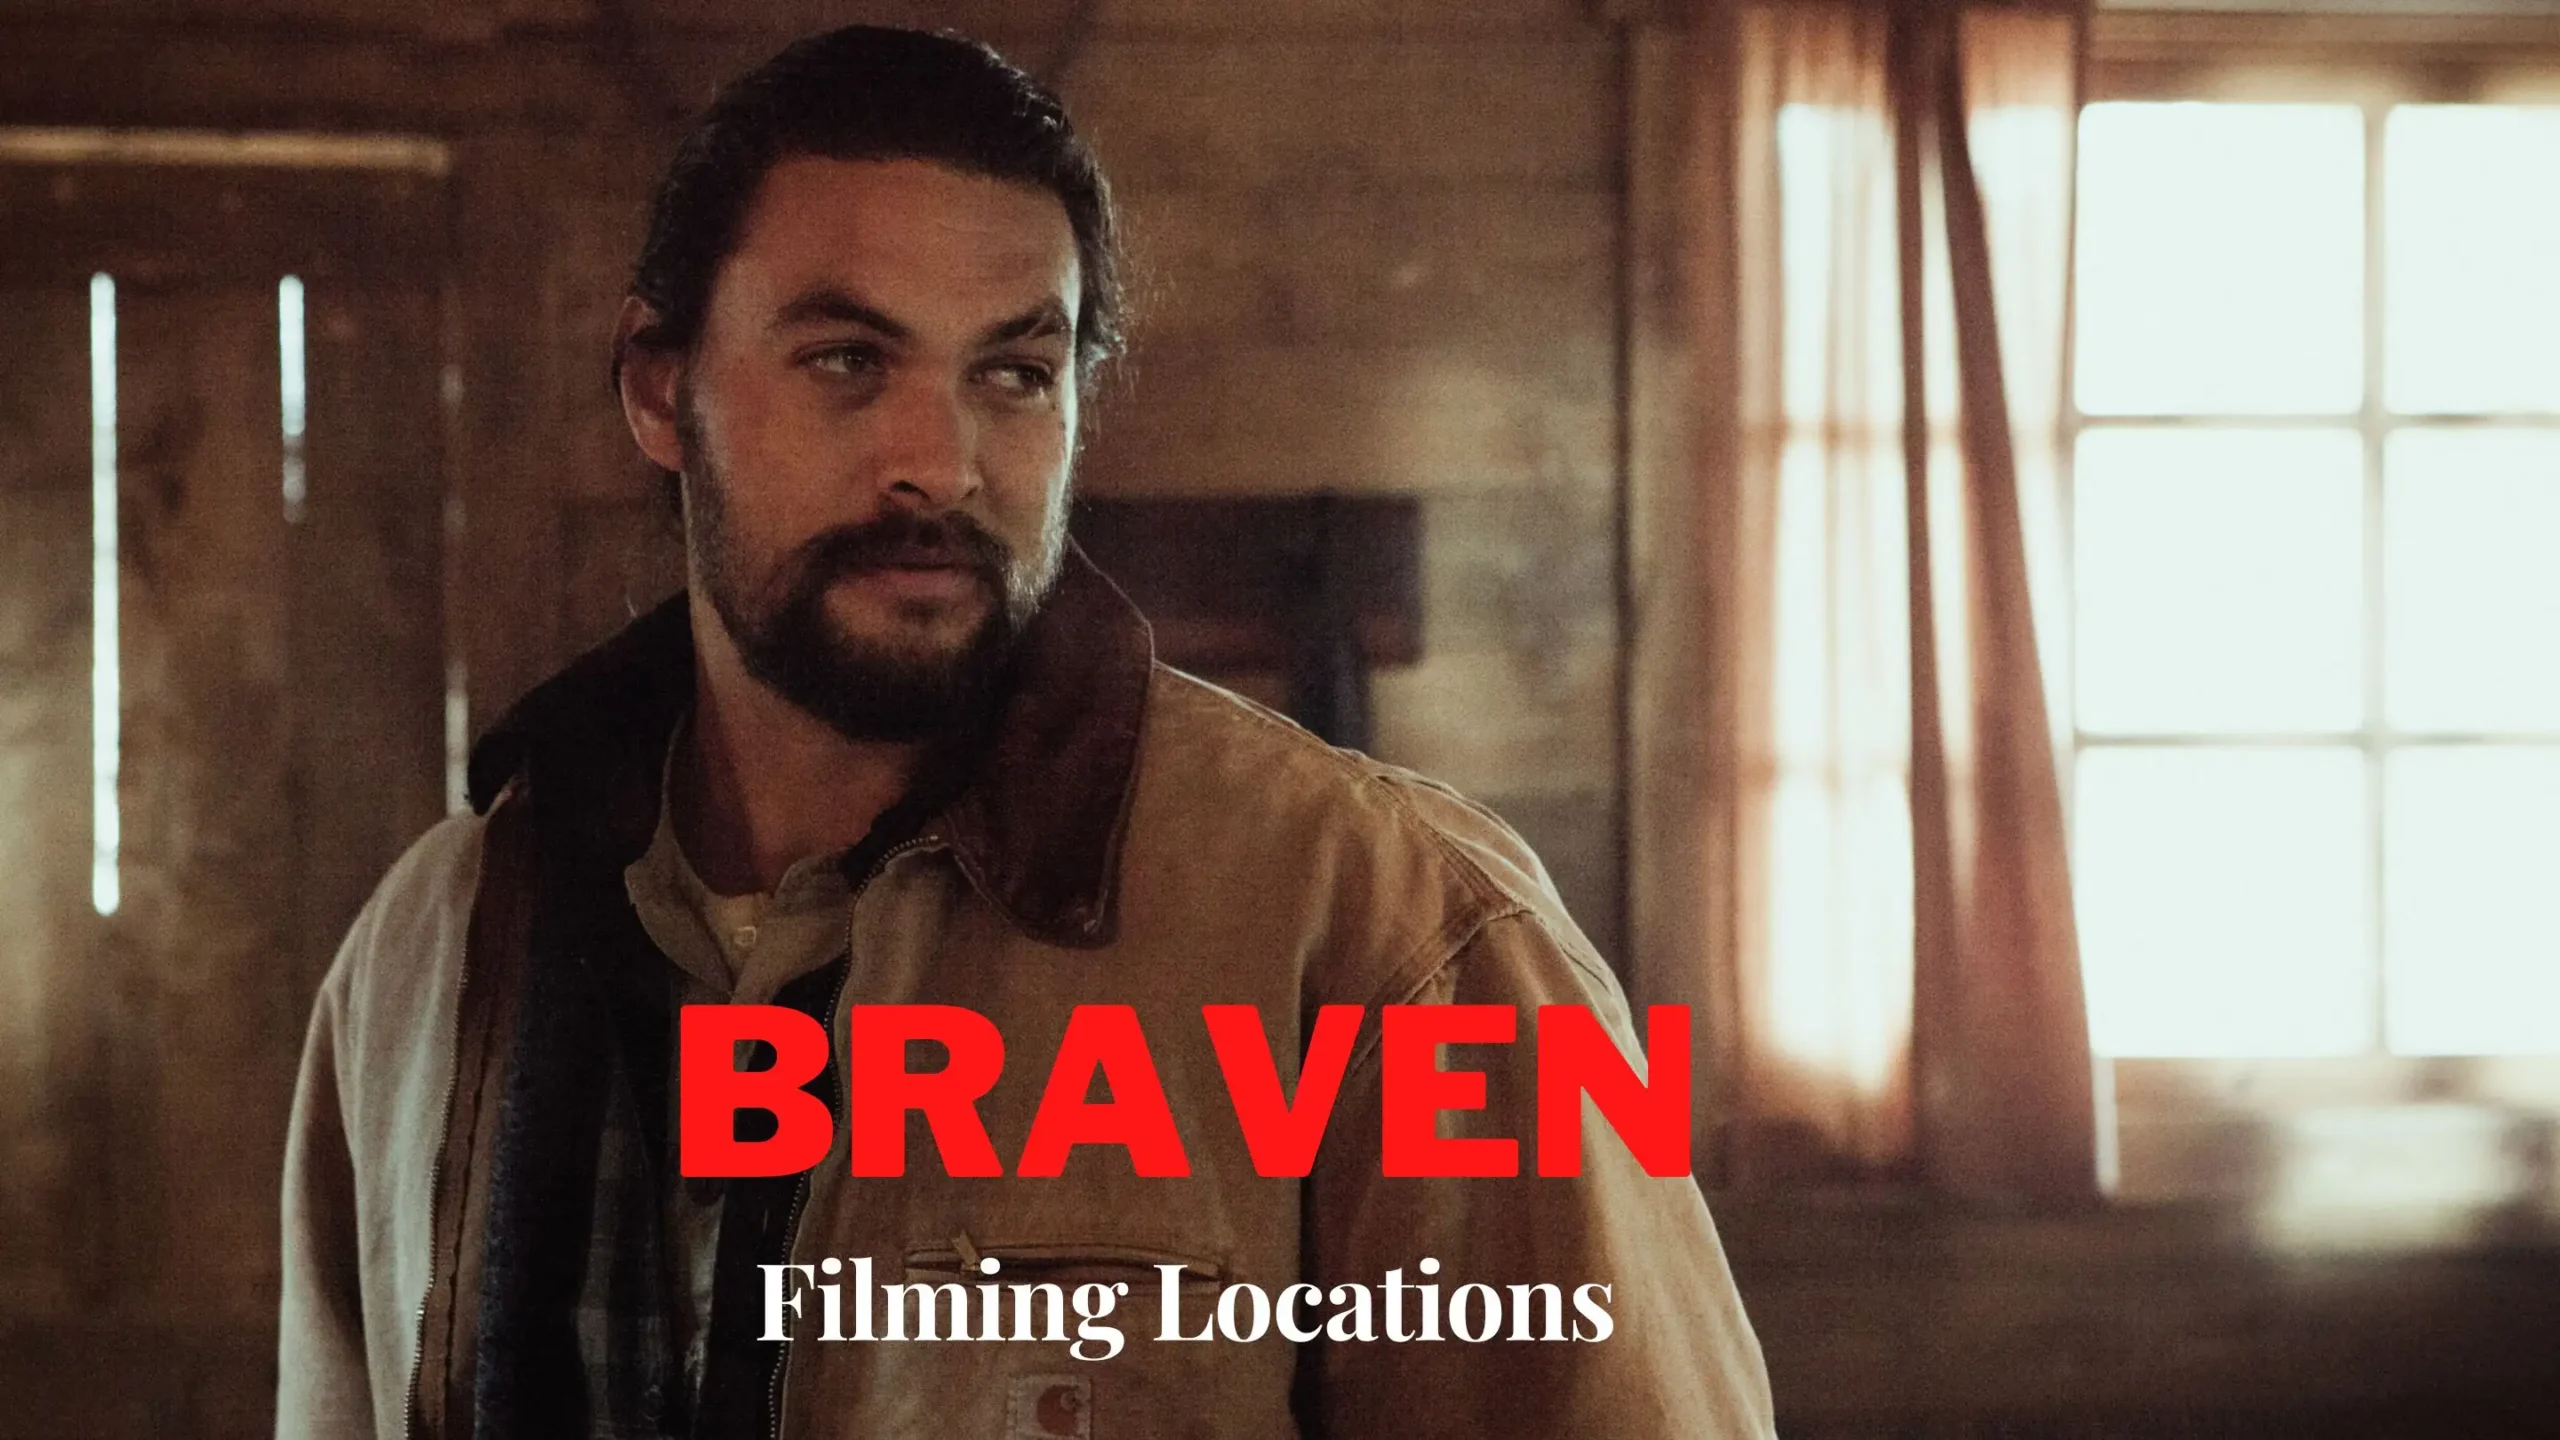 Braven Filming Locations